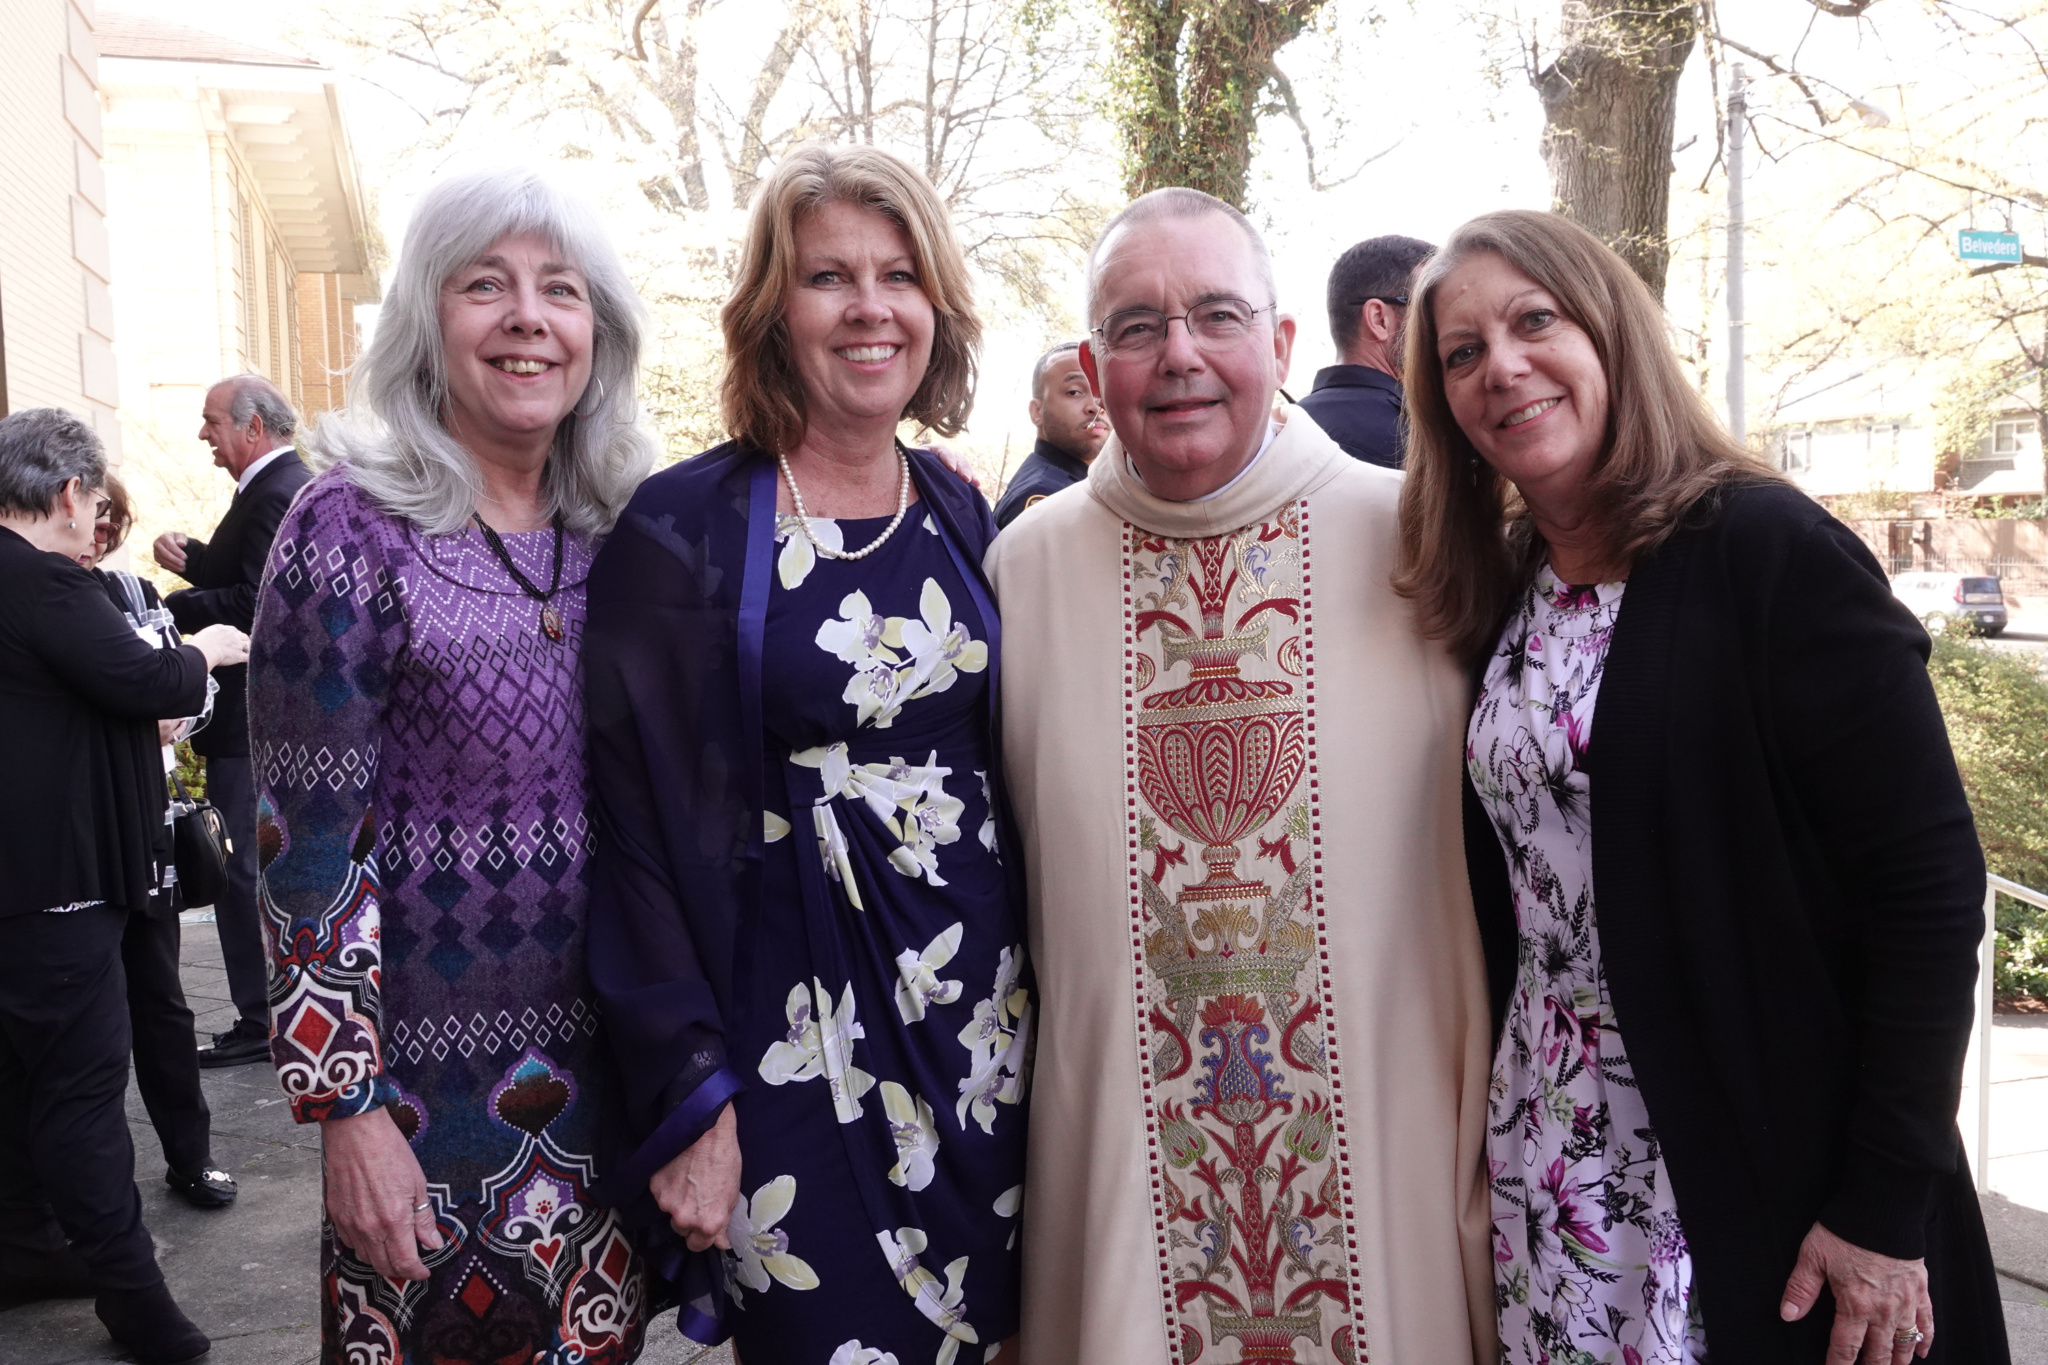 The Most Rev. David Talley became the sixth bishop of the Catholic Diocese of Memphis during a ceremony at the Cathedral of the Immaculate Conception on Tuesday April 2, 2019. © Karen Pulfer Focht